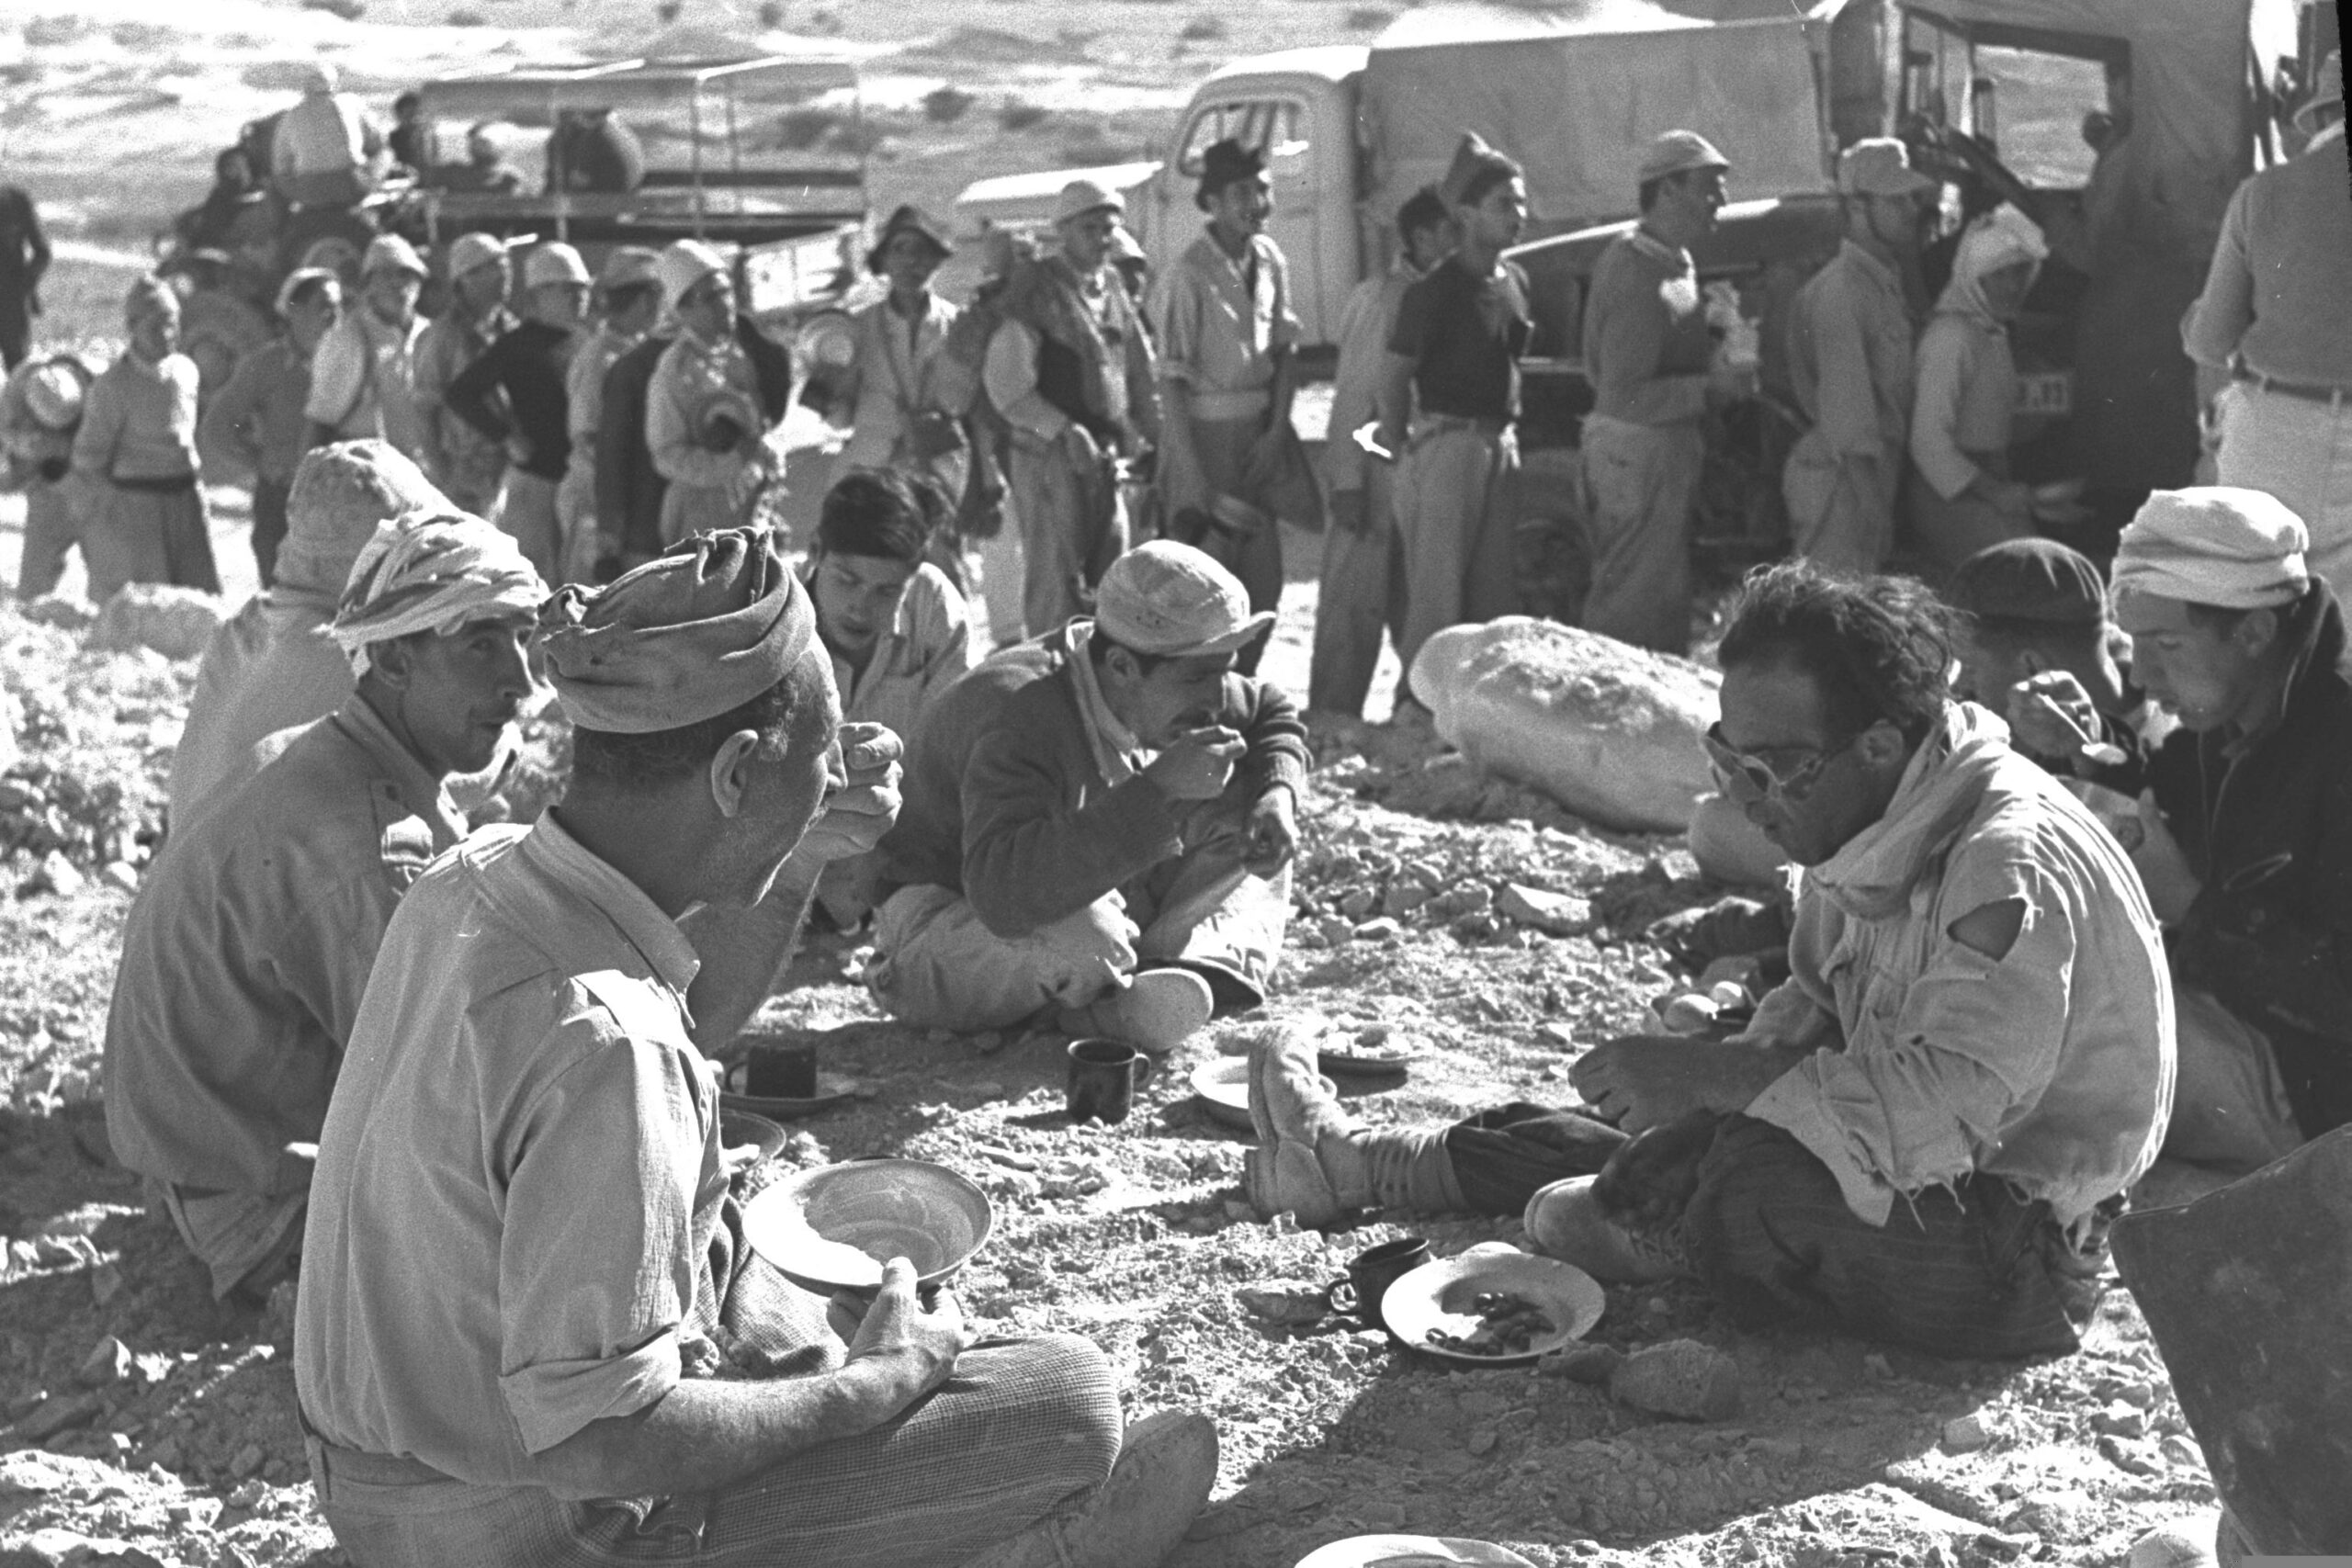 Palestinians and Jewish Workers During Lunch Break